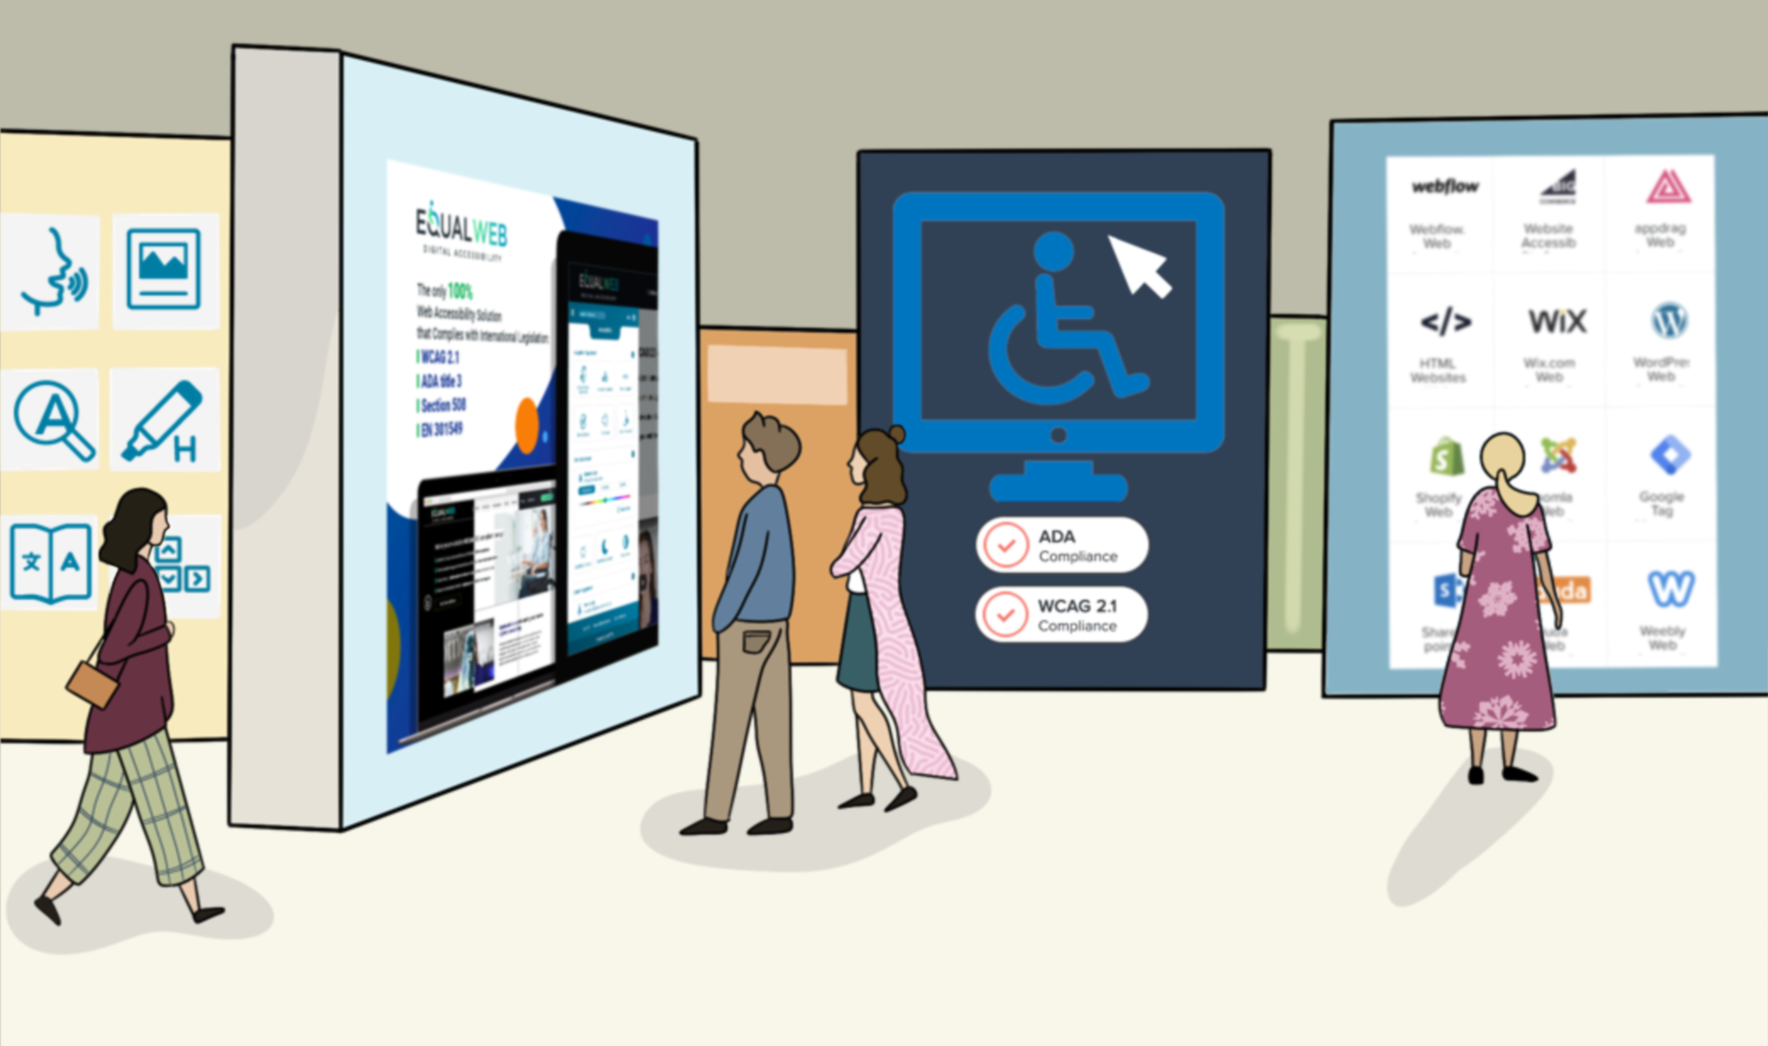 Accessible design as key feature of web accessibility compliance